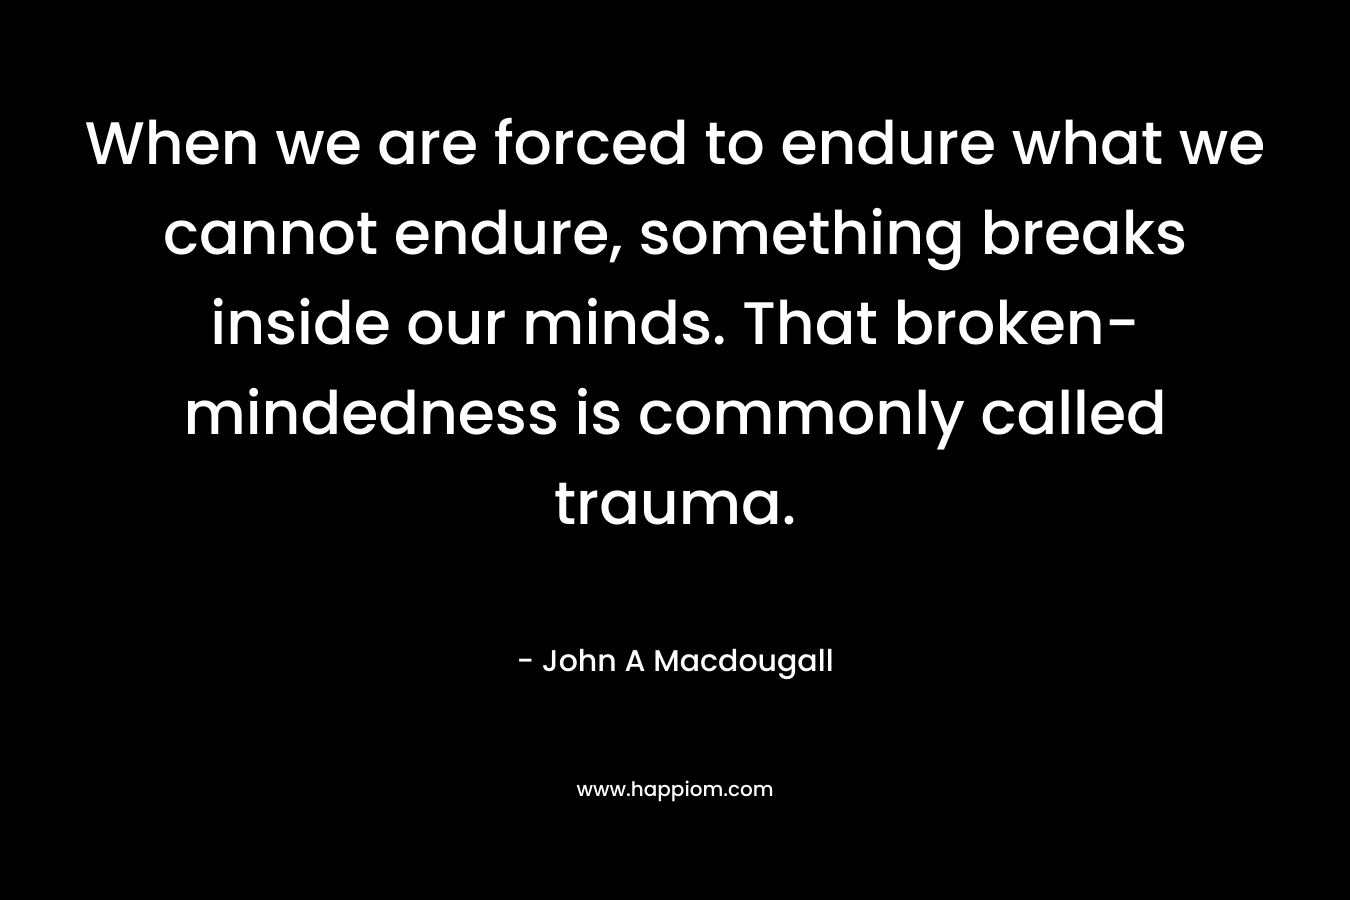 When we are forced to endure what we cannot endure, something breaks inside our minds. That broken-mindedness is commonly called trauma. – John A Macdougall